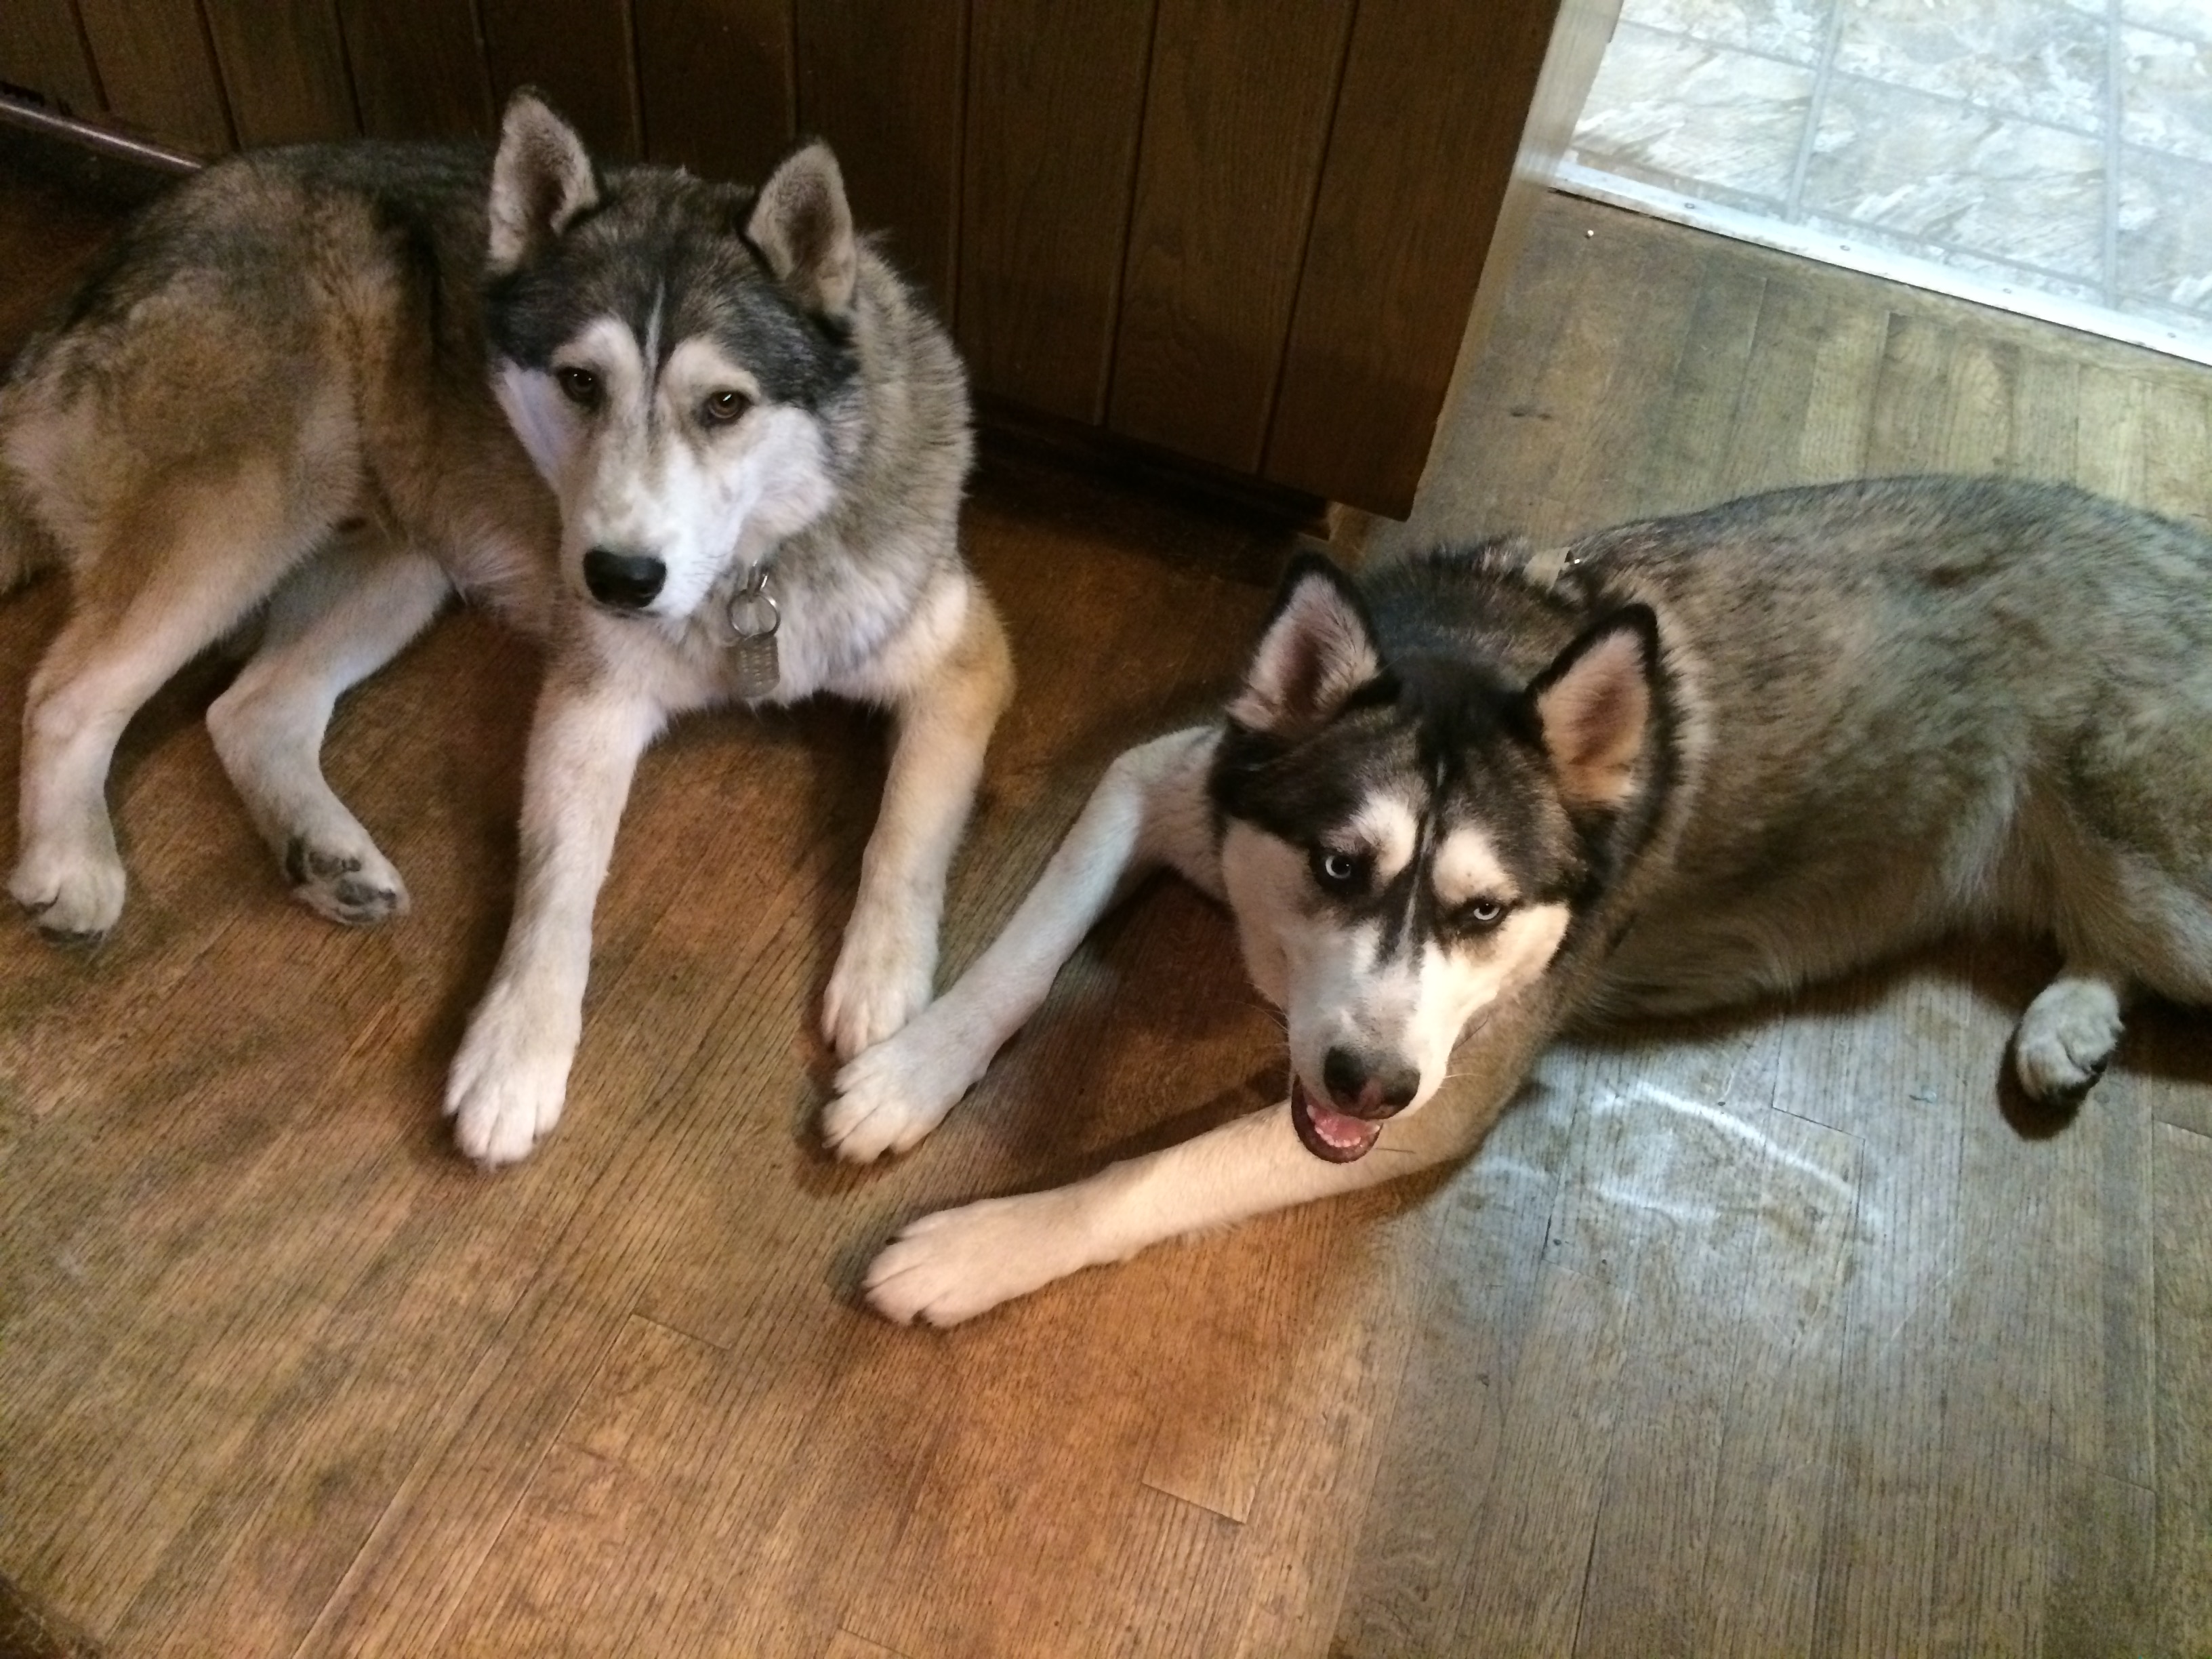 A black and white husky and a grey and white husky laying on the wood floor with their tongues out looking at the camera.